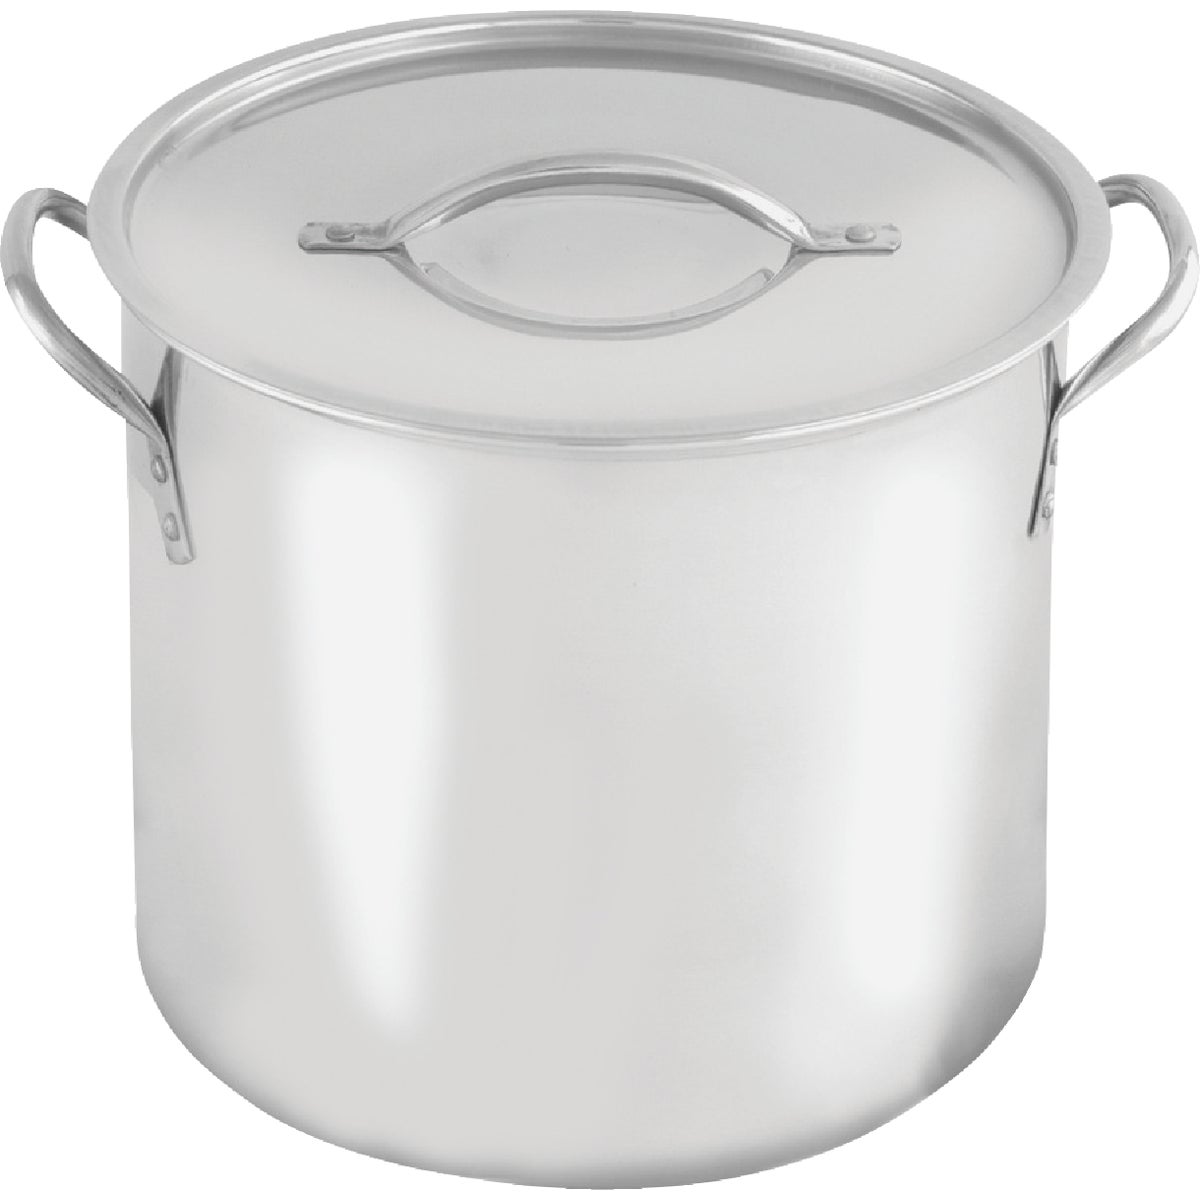 McSunley 16 Qt. Polished Stainless Steel Stockpot